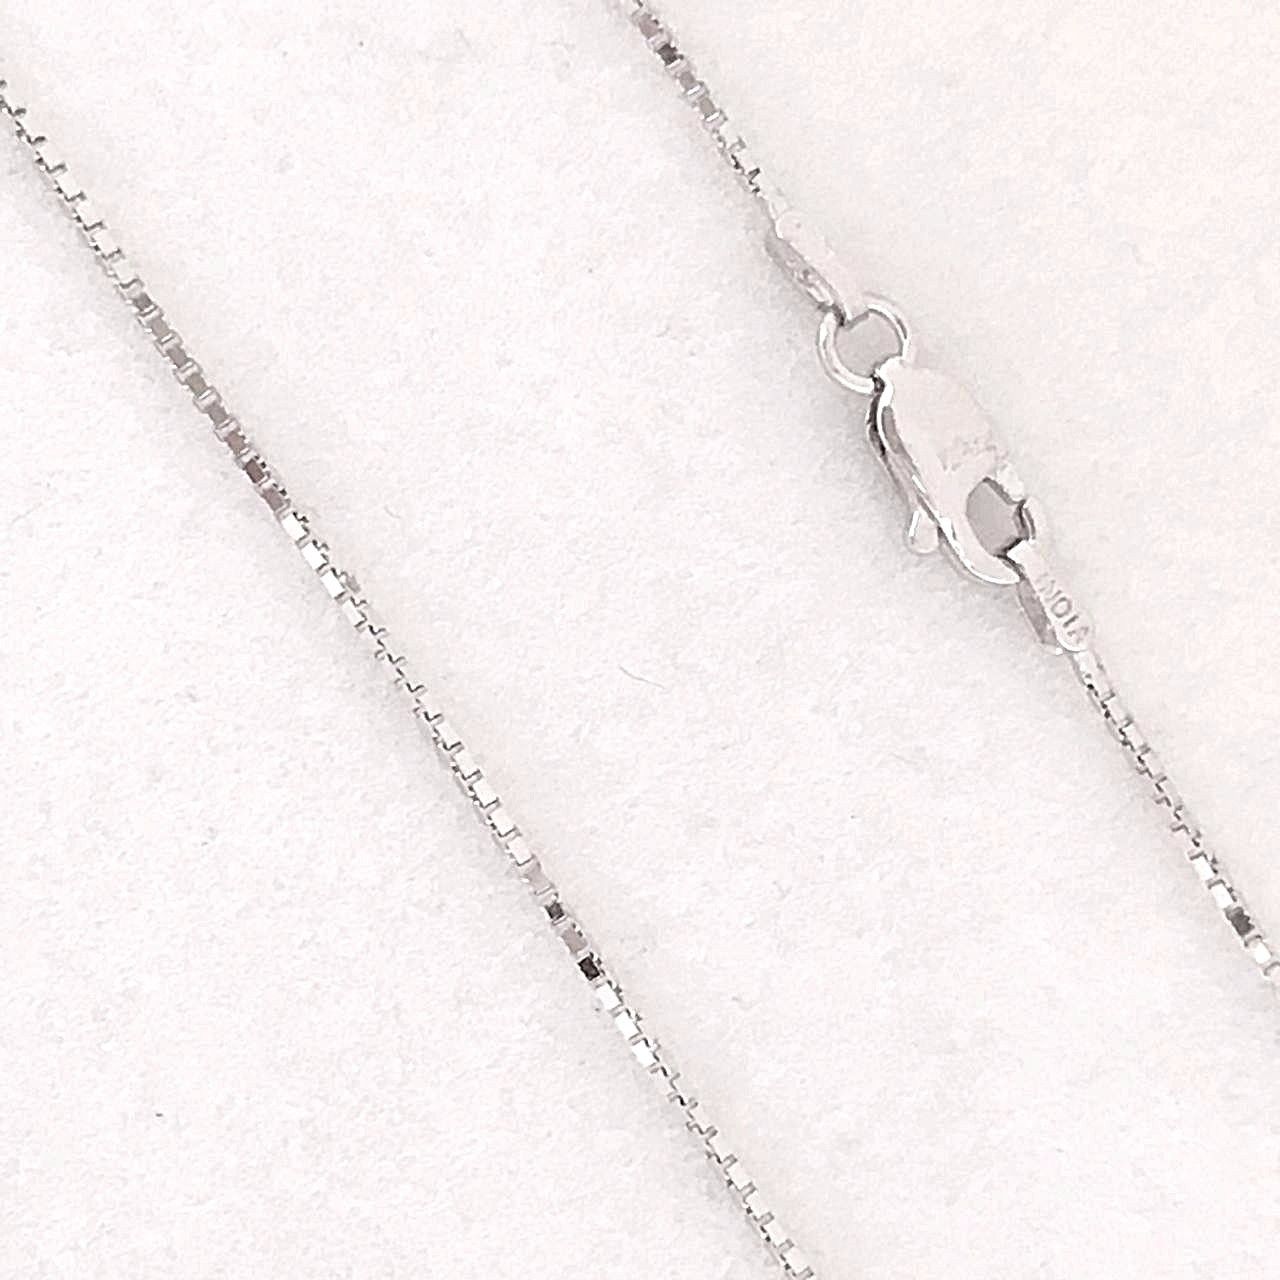 18 inch 14K white gold box chain with lobster clasp 2.6 grams $370